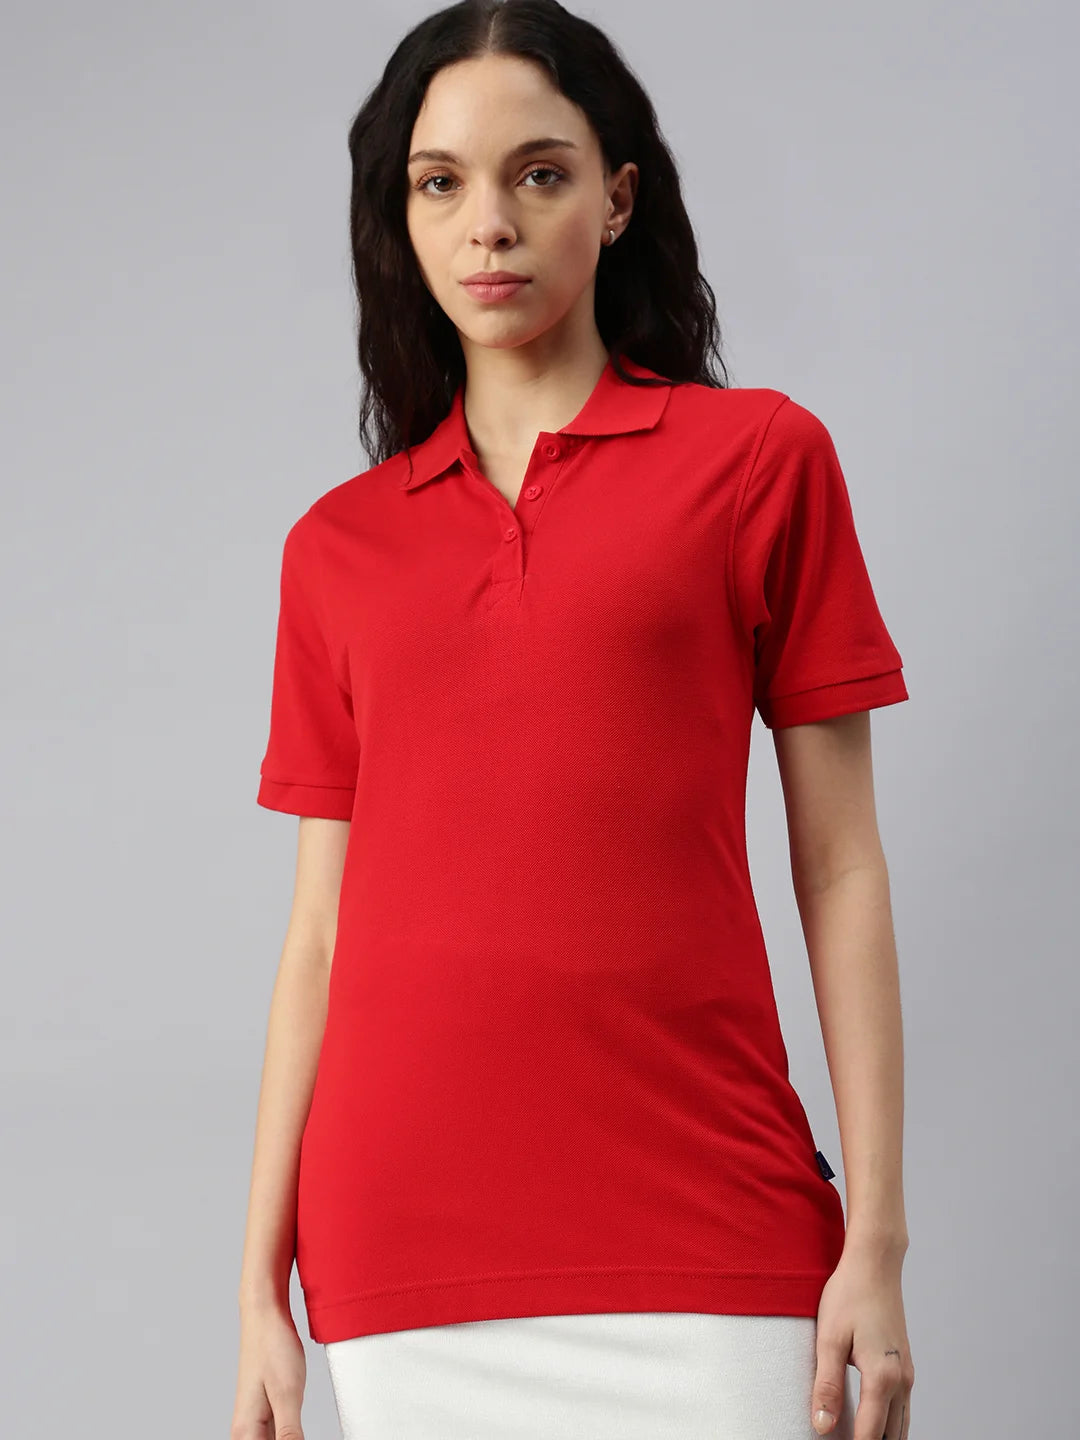 files/frauen-whale-baumwolle-poloshirt-rouge-Front.webp